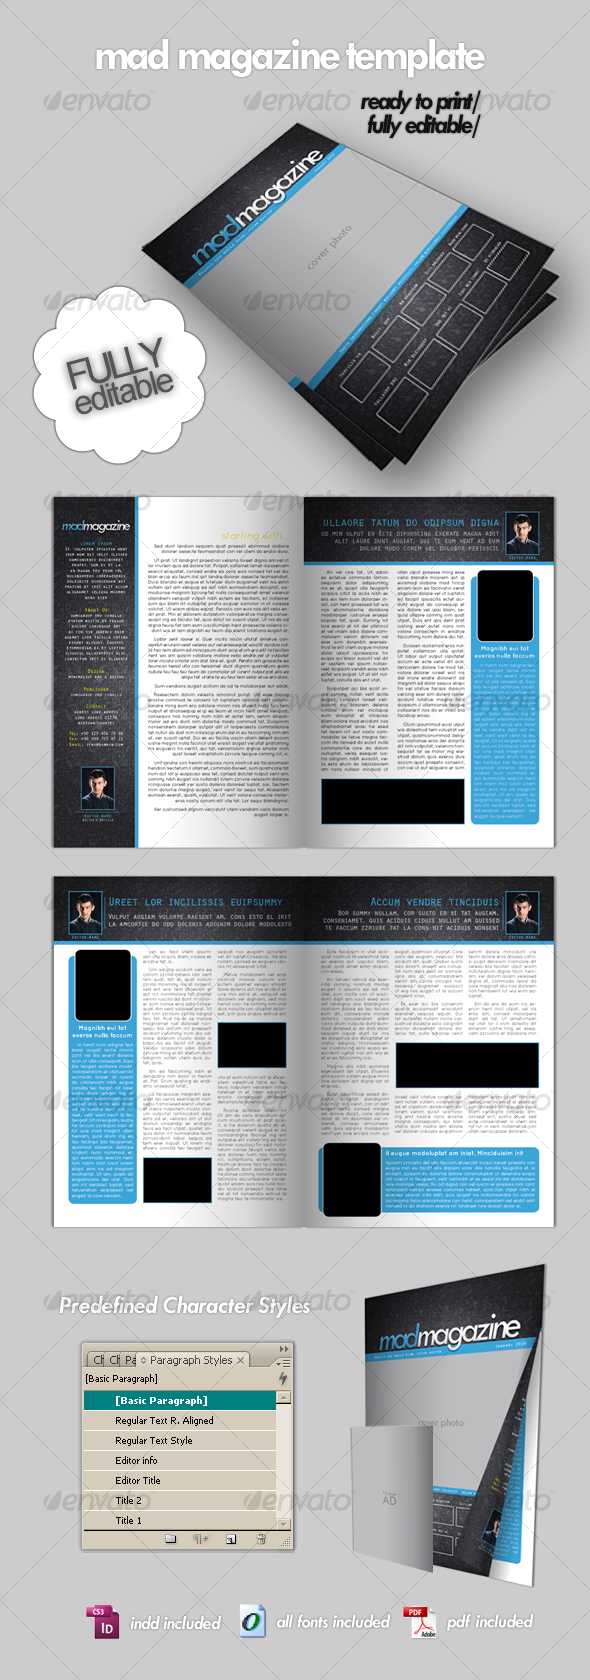 55+ Best Magazine Templates – Photoshop Psd & Indesign Within Blank Magazine Template Psd